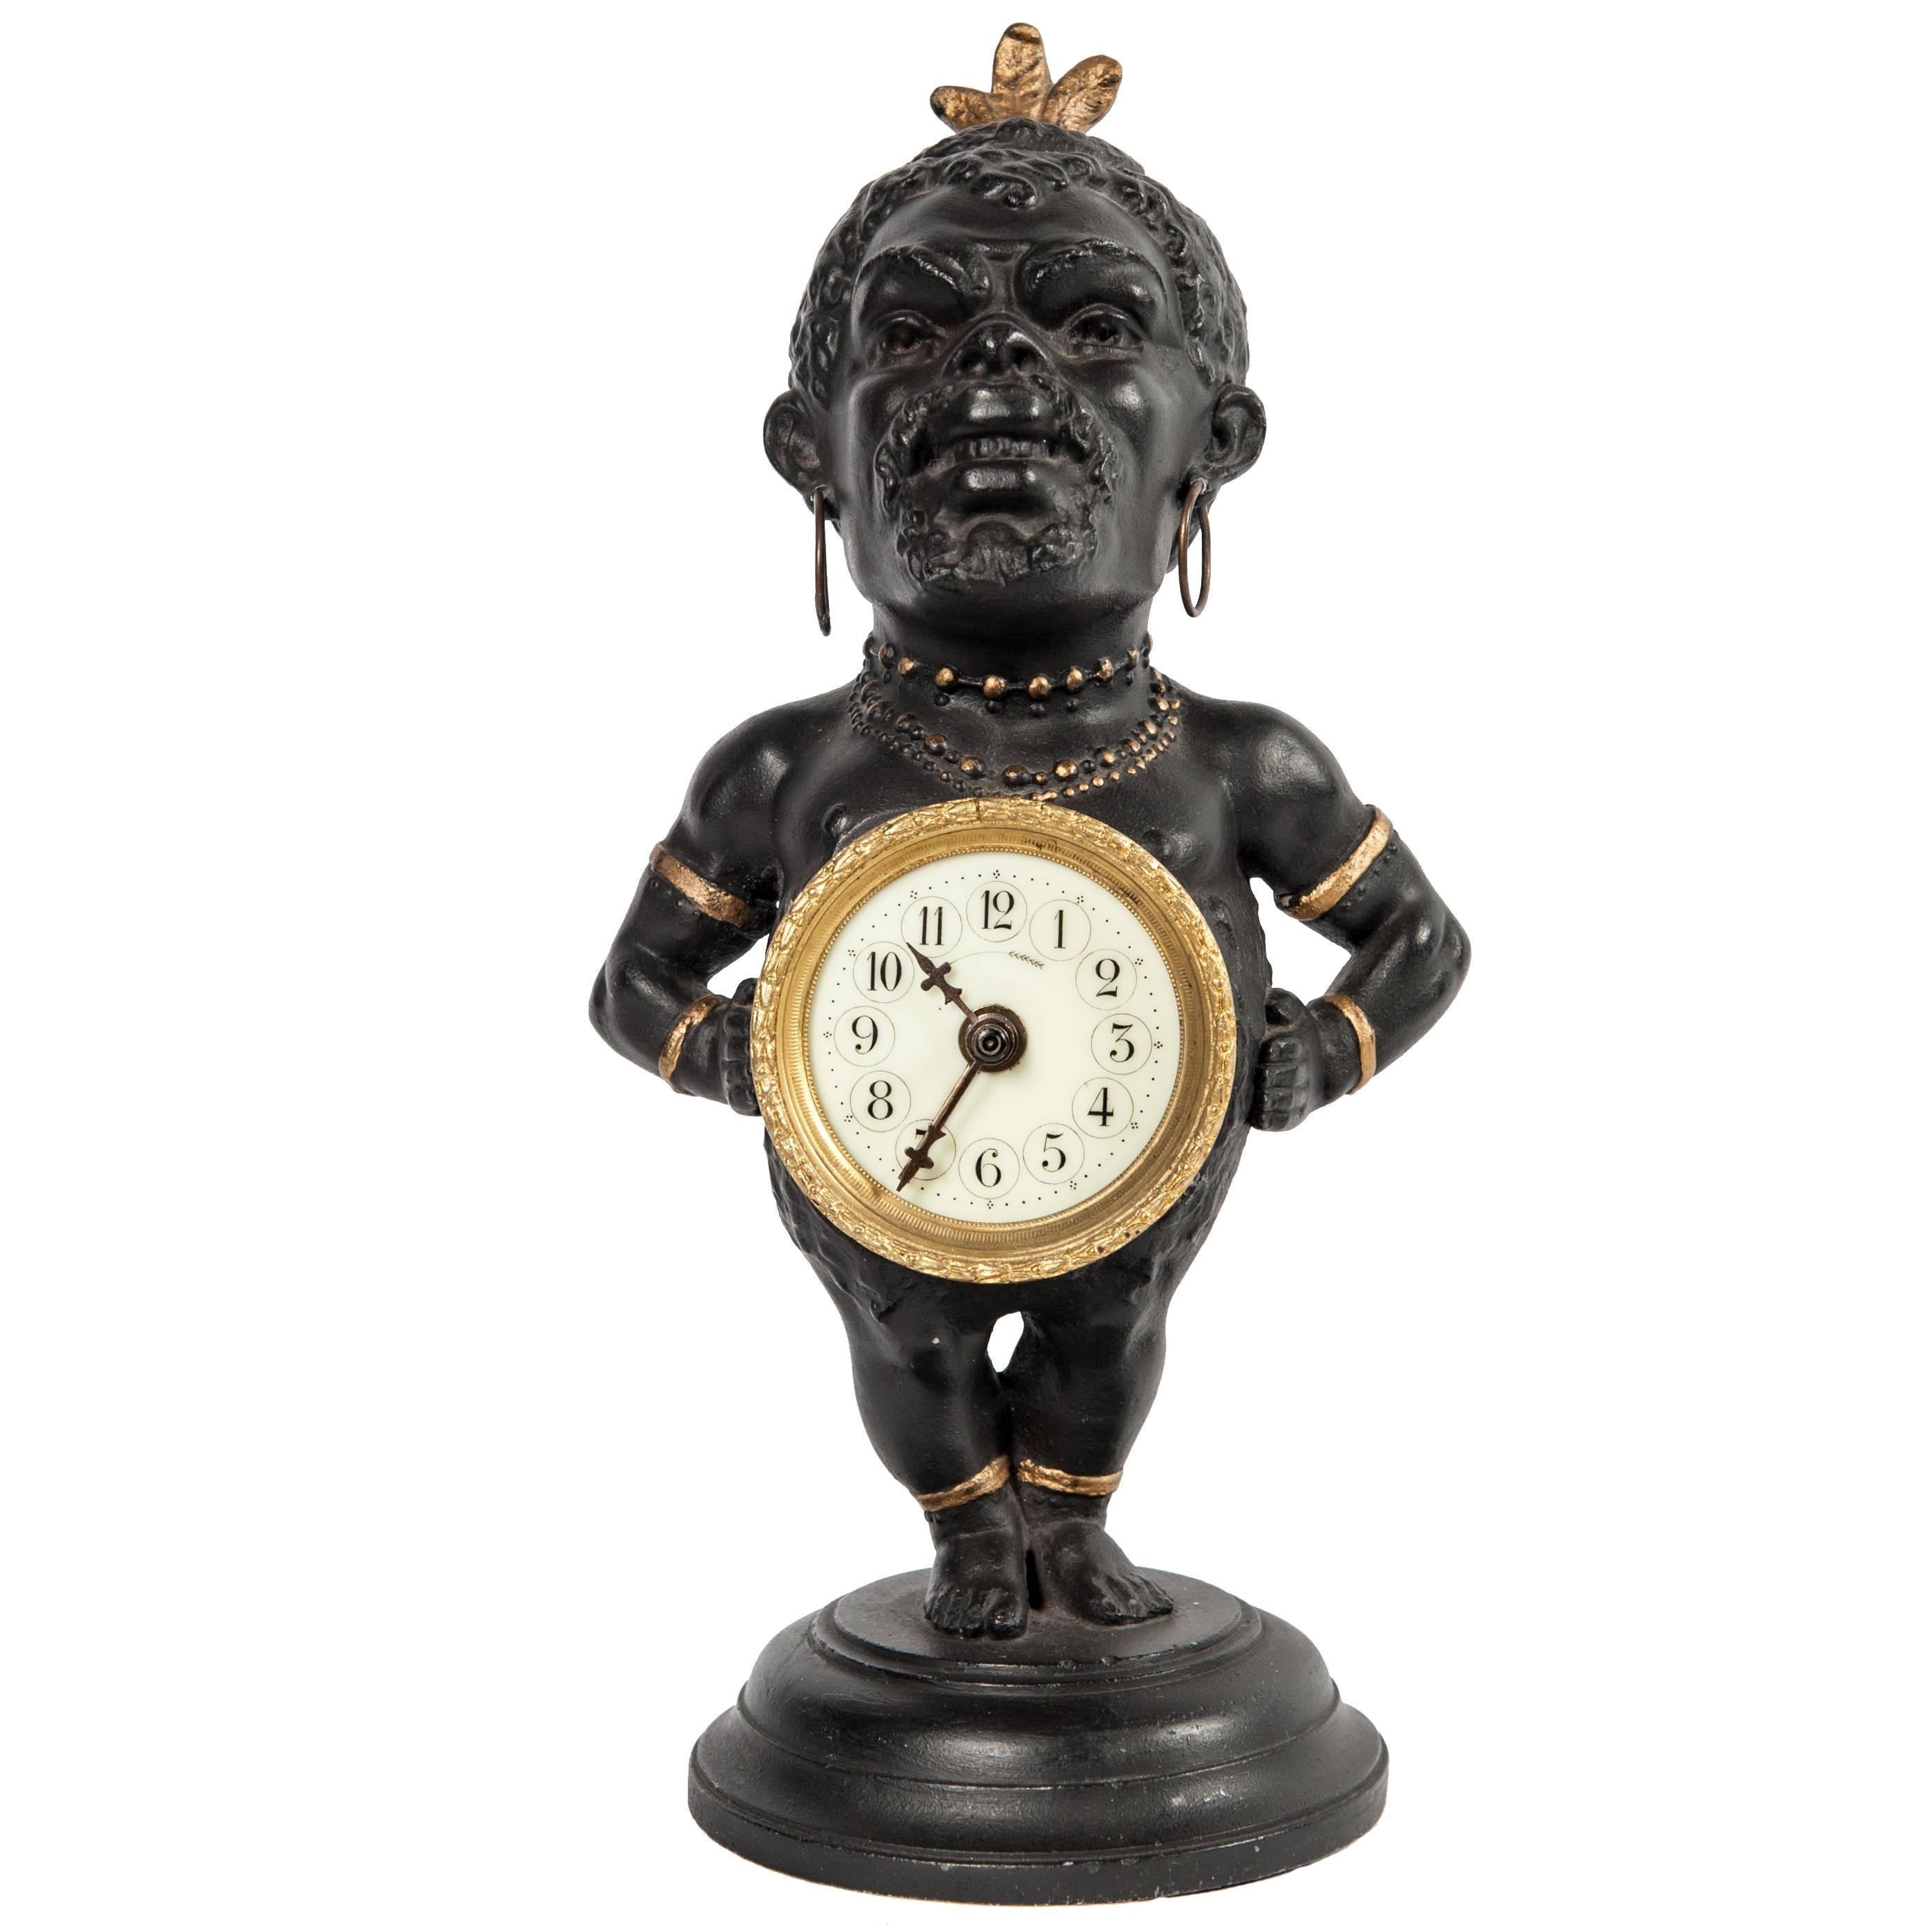 Decorative Polychrome French White Metal Time Piece Clock Figure, circa 1880 For Sale